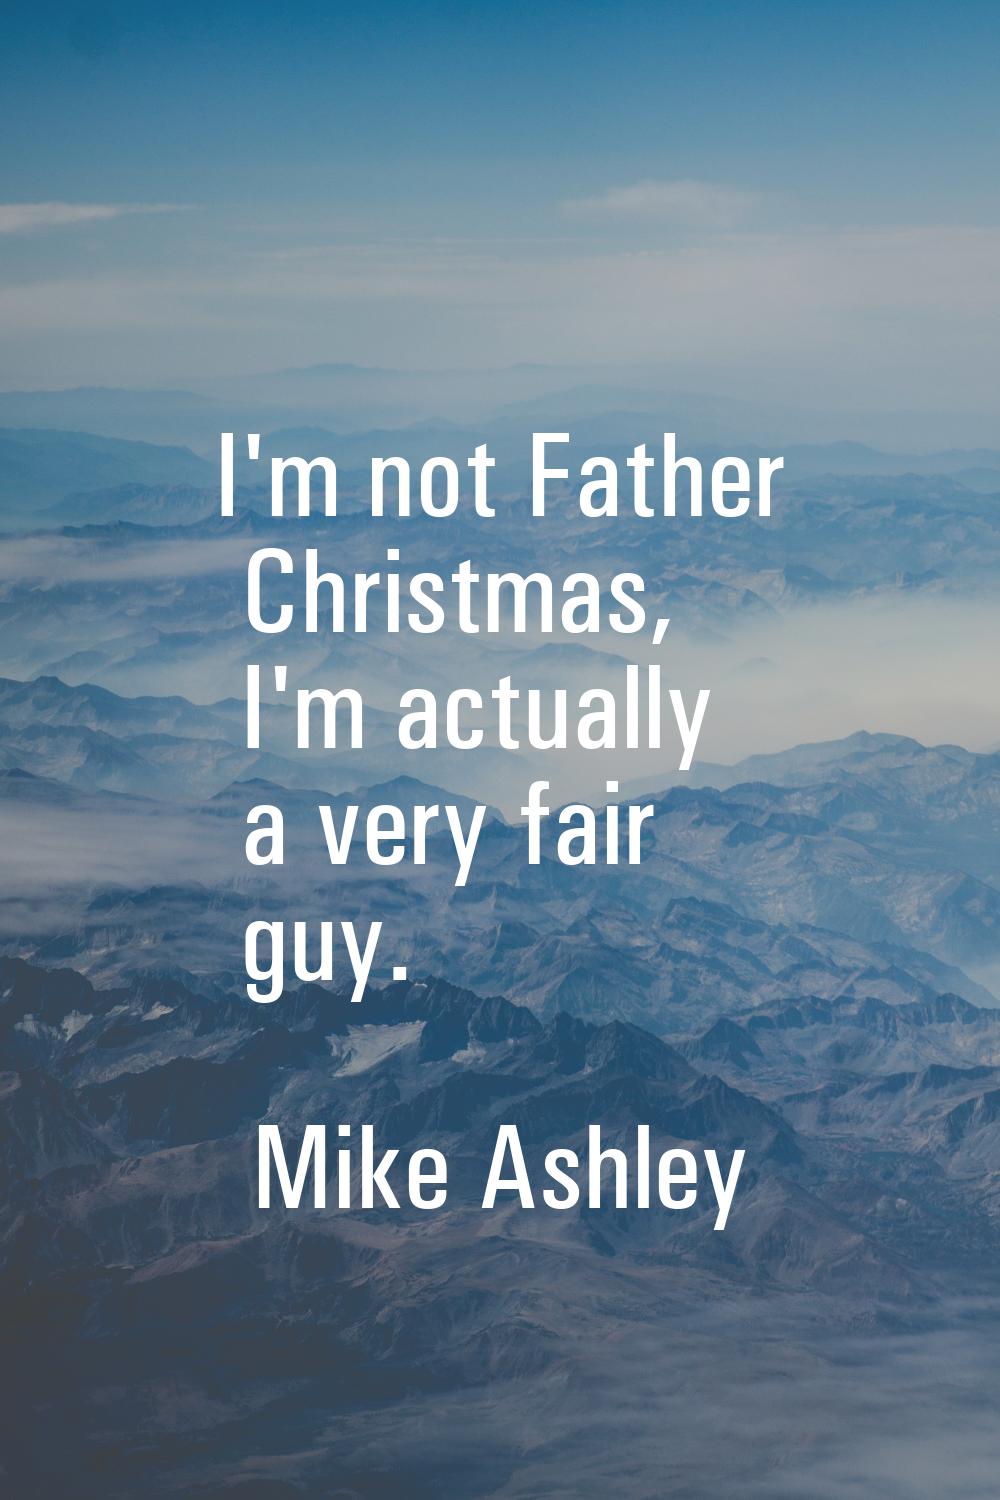 I'm not Father Christmas, I'm actually a very fair guy.